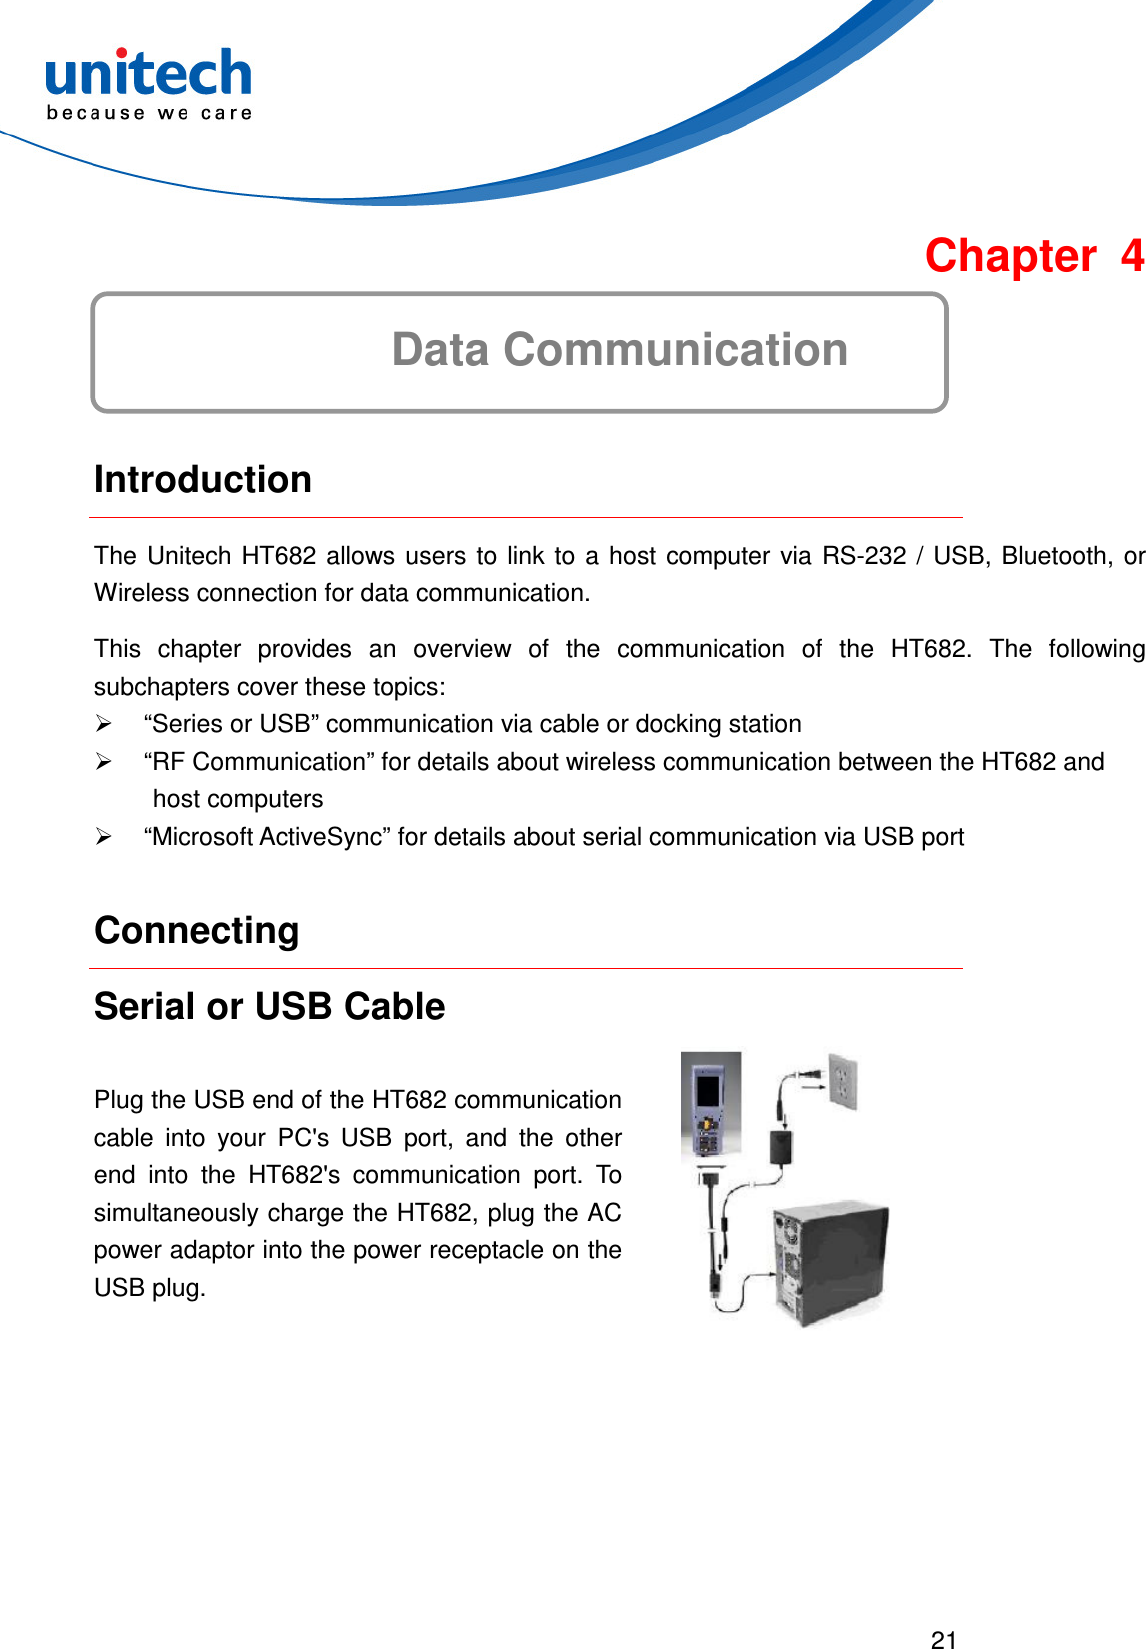  21   Chapter 4 Data Communication  Introduction The  Unitech  HT682  allows  users  to link to a host  computer  via  RS-232  /  USB,  Bluetooth, or Wireless connection for data communication. This  chapter  provides  an  overview  of  the  communication  of  the  HT682.  The  following subchapters cover these topics:   “Series or USB” communication via cable or docking station   “RF Communication” for details about wireless communication between the HT682 and host computers   “Microsoft ActiveSync” for details about serial communication via USB port Connecting Serial or USB Cable Plug the USB end of the HT682 communication cable  into  your  PC&apos;s  USB  port,  and  the  other end  into  the  HT682&apos;s  communication  port.  To simultaneously charge the HT682, plug the AC power adaptor into the power receptacle on the USB plug.  